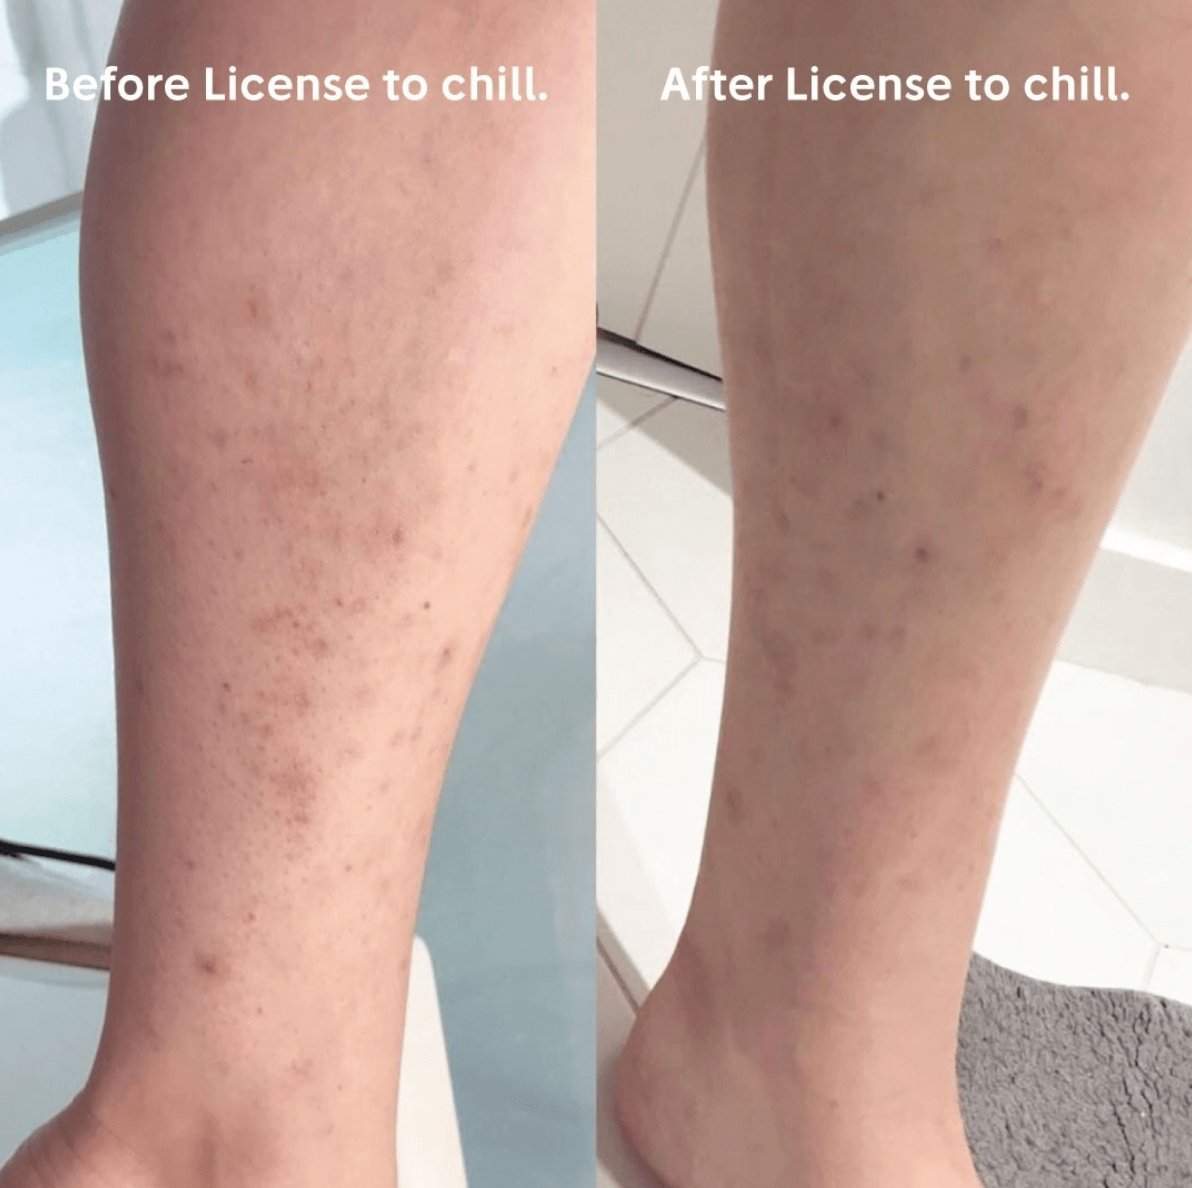 Gabriela reduced body acne with License to chill - Anese